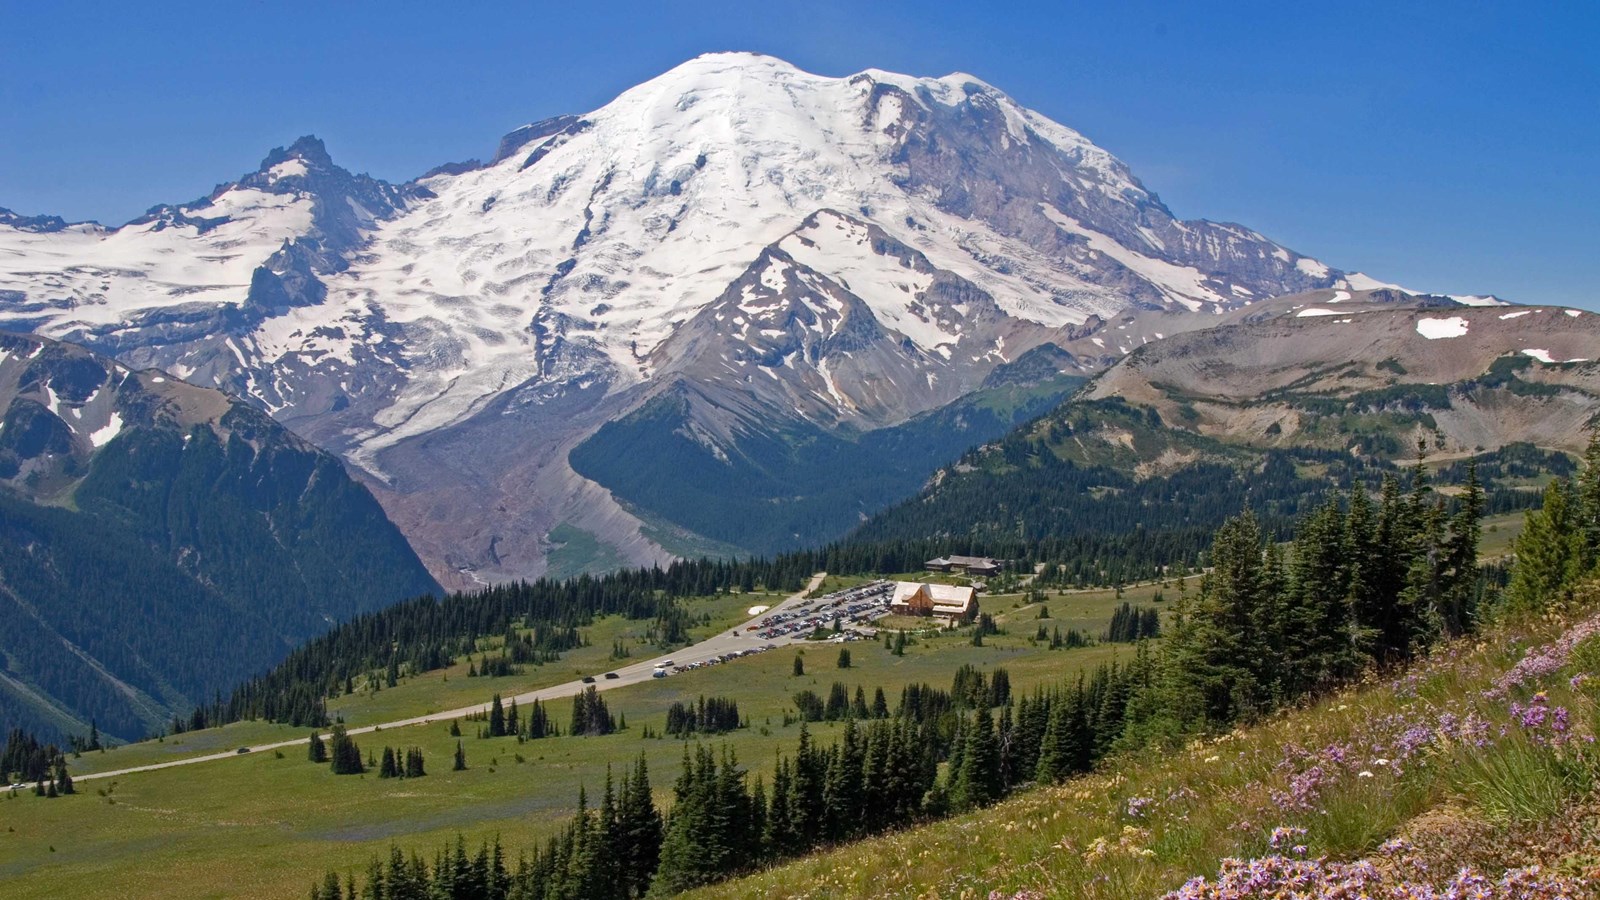 Mount Rainier with meadows dotted with wildflowers and trees leads to a parking lot and buildings.